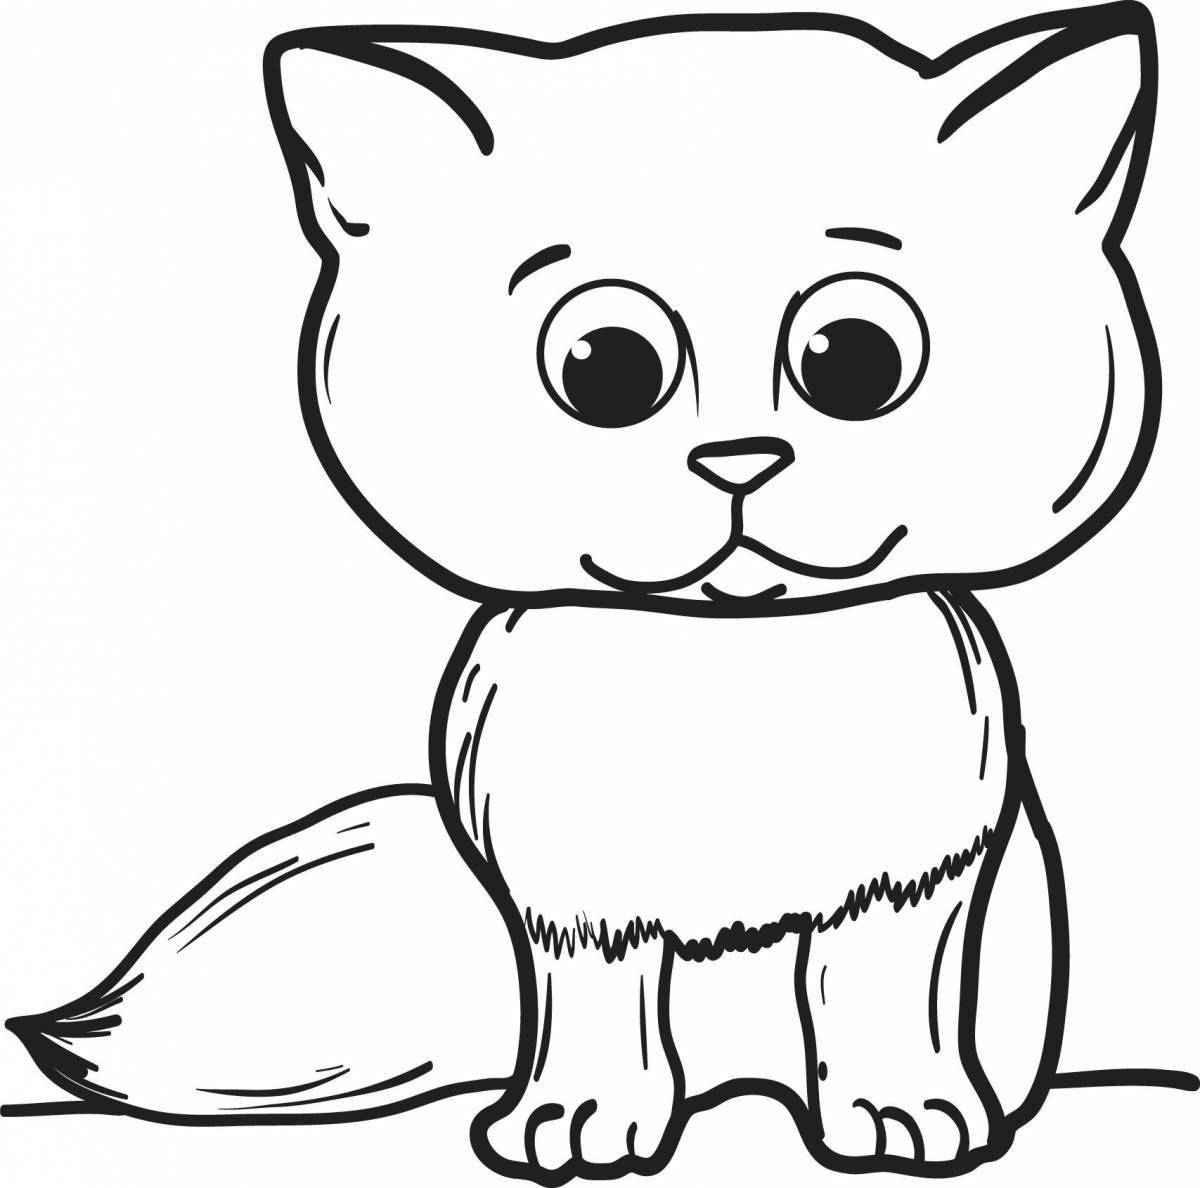 Cute little kittens coloring page